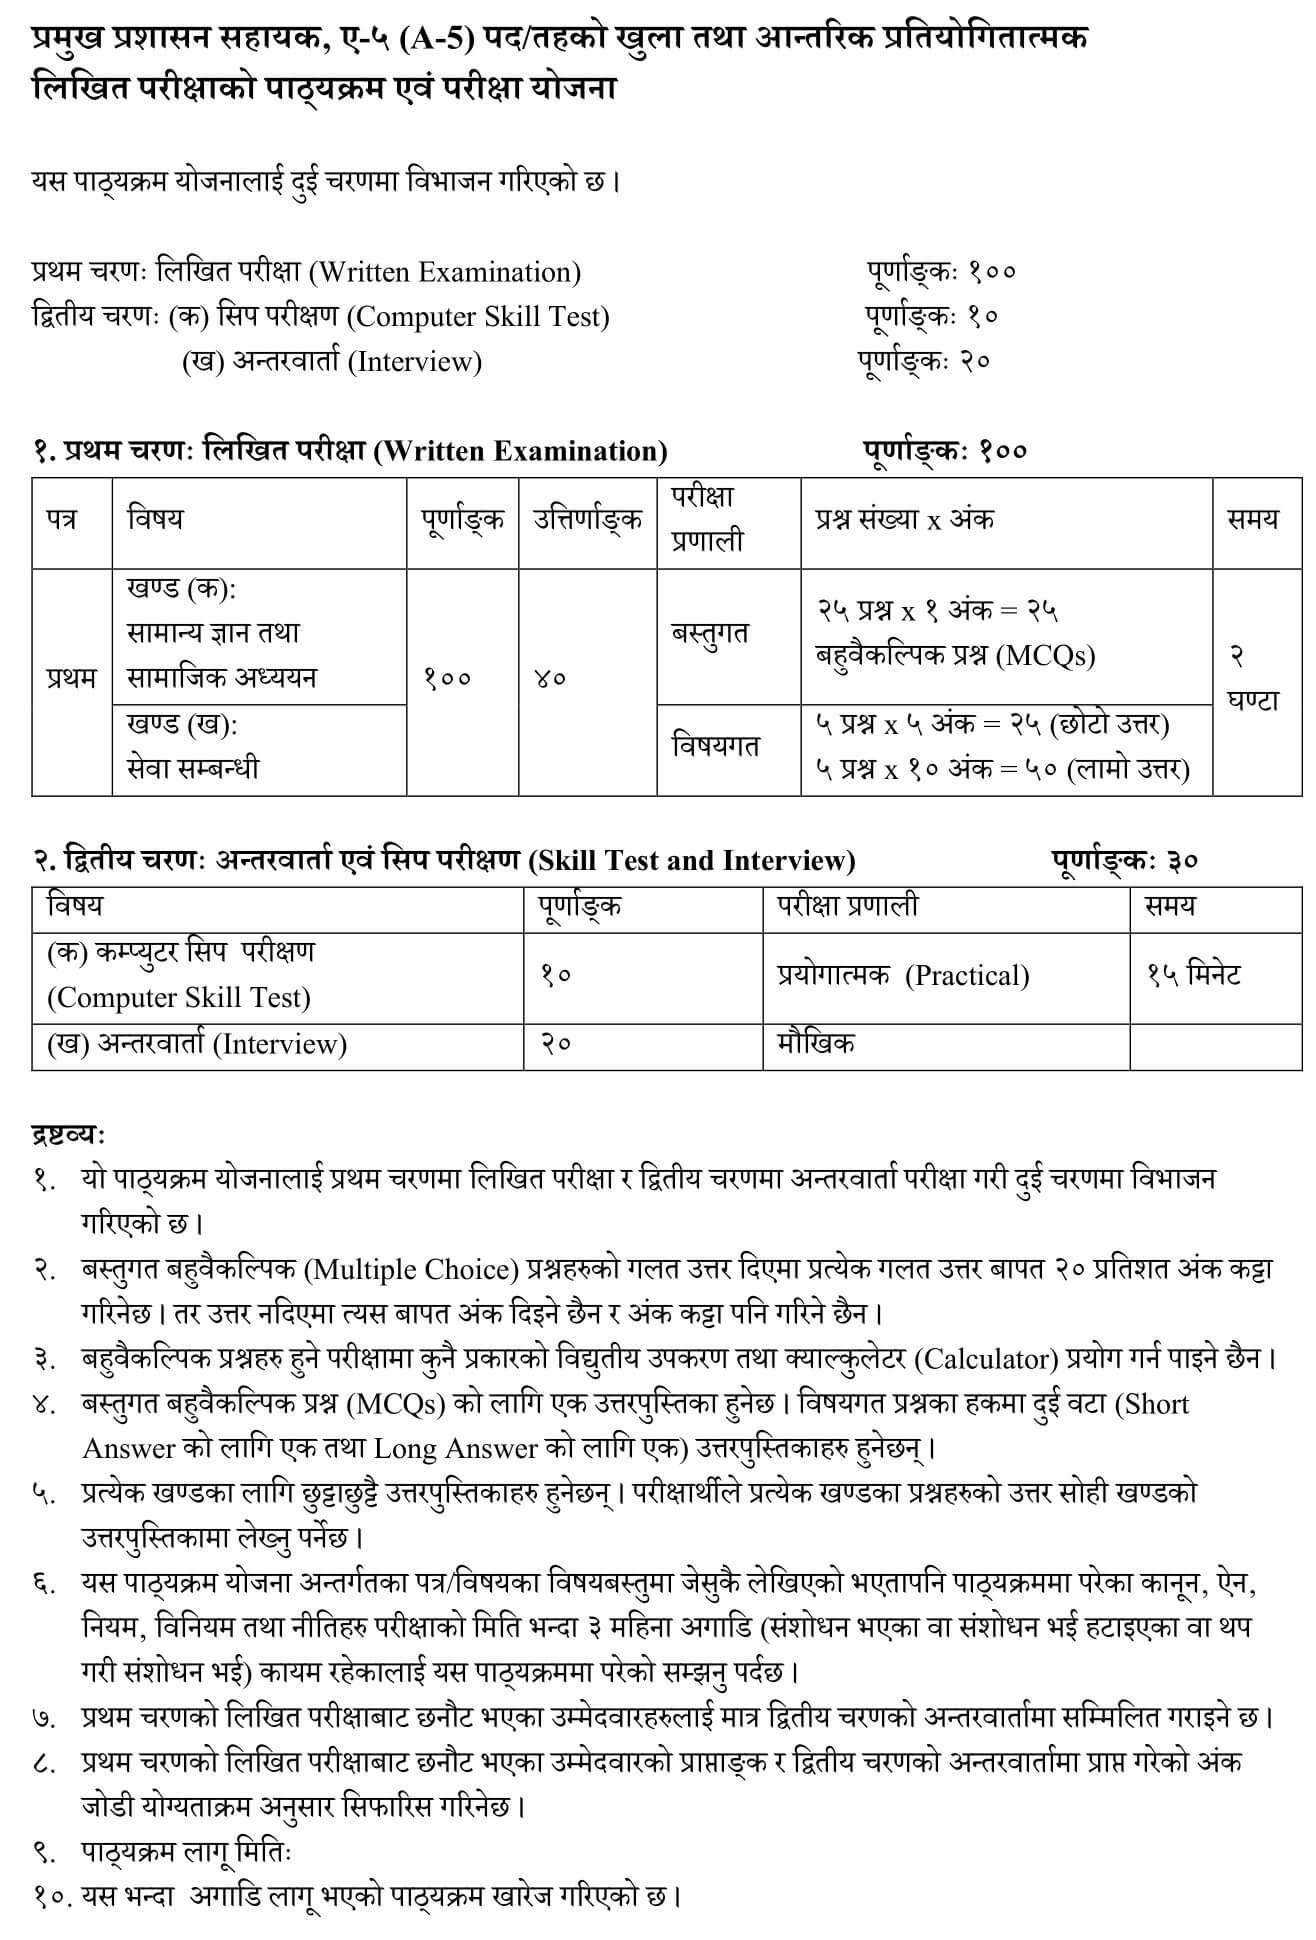 Nepal Agricultural Research Council Level 5 Administration Syllabus. NARC Level 5 Administration Syllabus. NARC Syllabus.